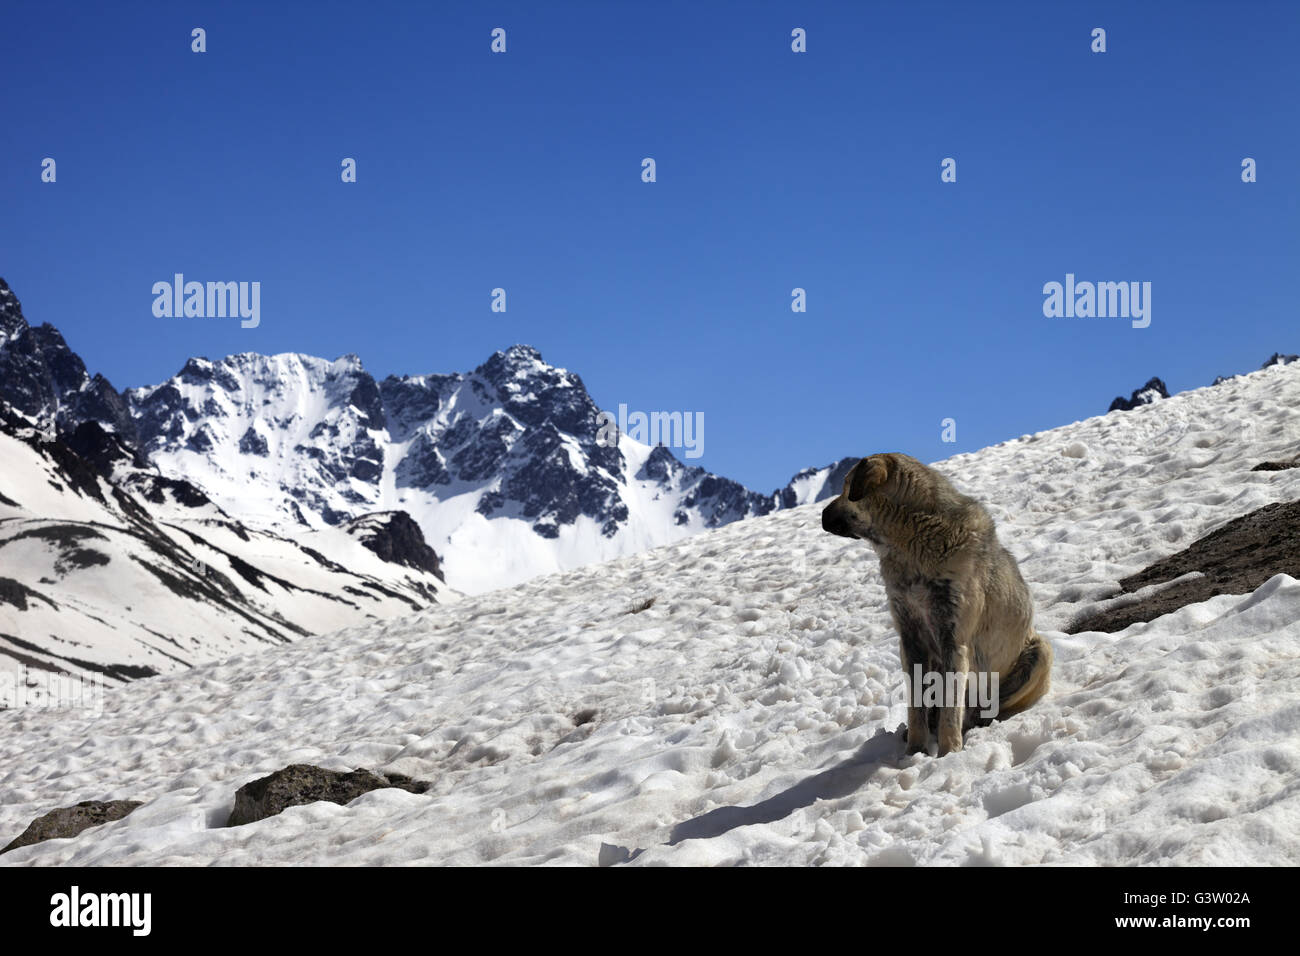 Dog in snowy mountains at nice spring day. Turkey, Kachkar Mountains (highest part of Pontic Mountains). Stock Photo